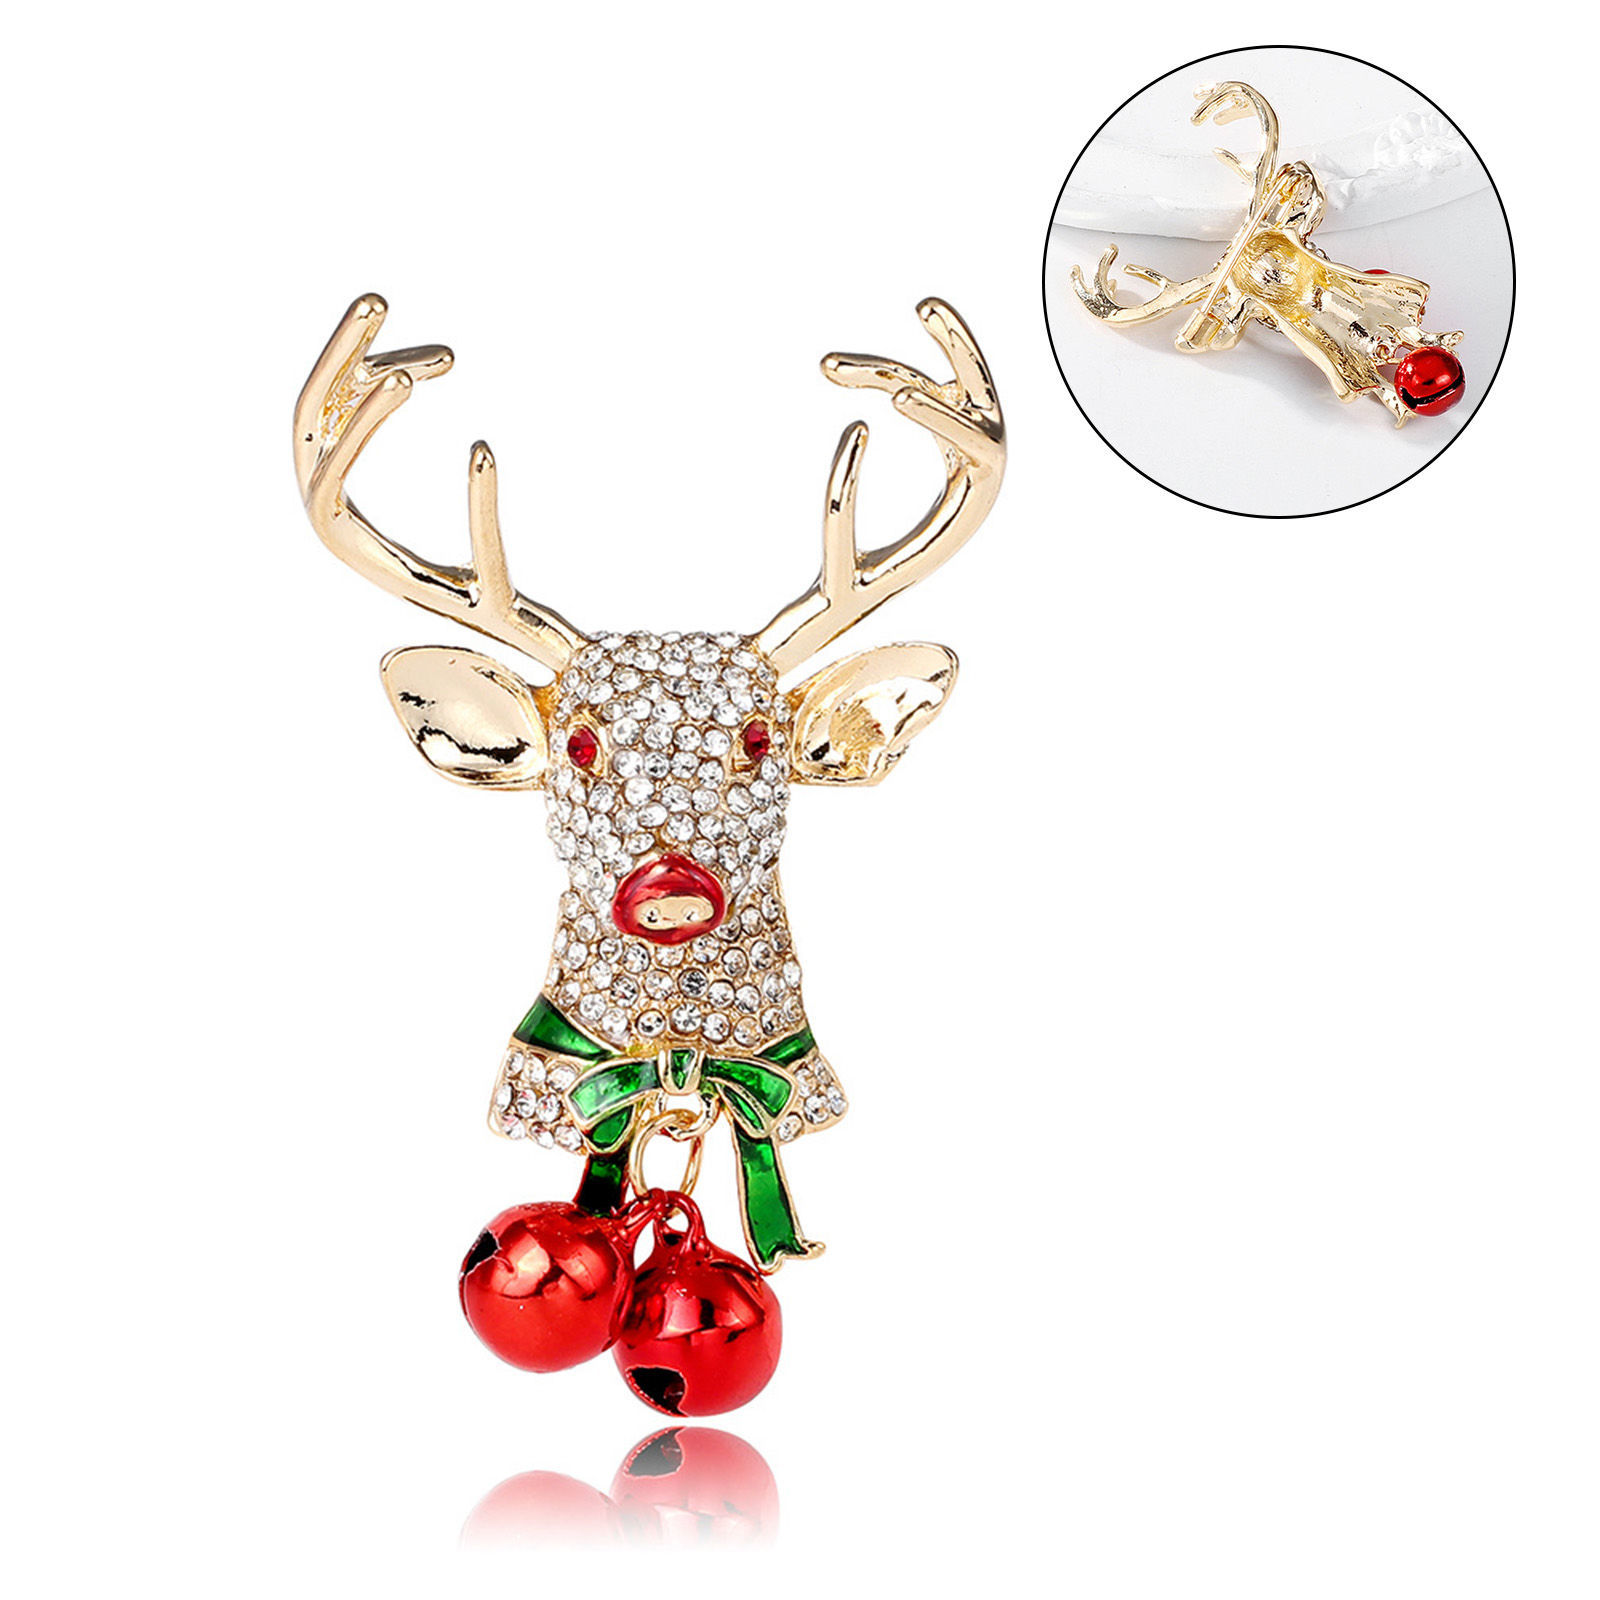 Picture of Retro Pin Brooches Christmas Reindeer Bell Gold Plated Red & Green Enamel Clear Rhinestone 5.3cm x 3.8cm, 1 Piece